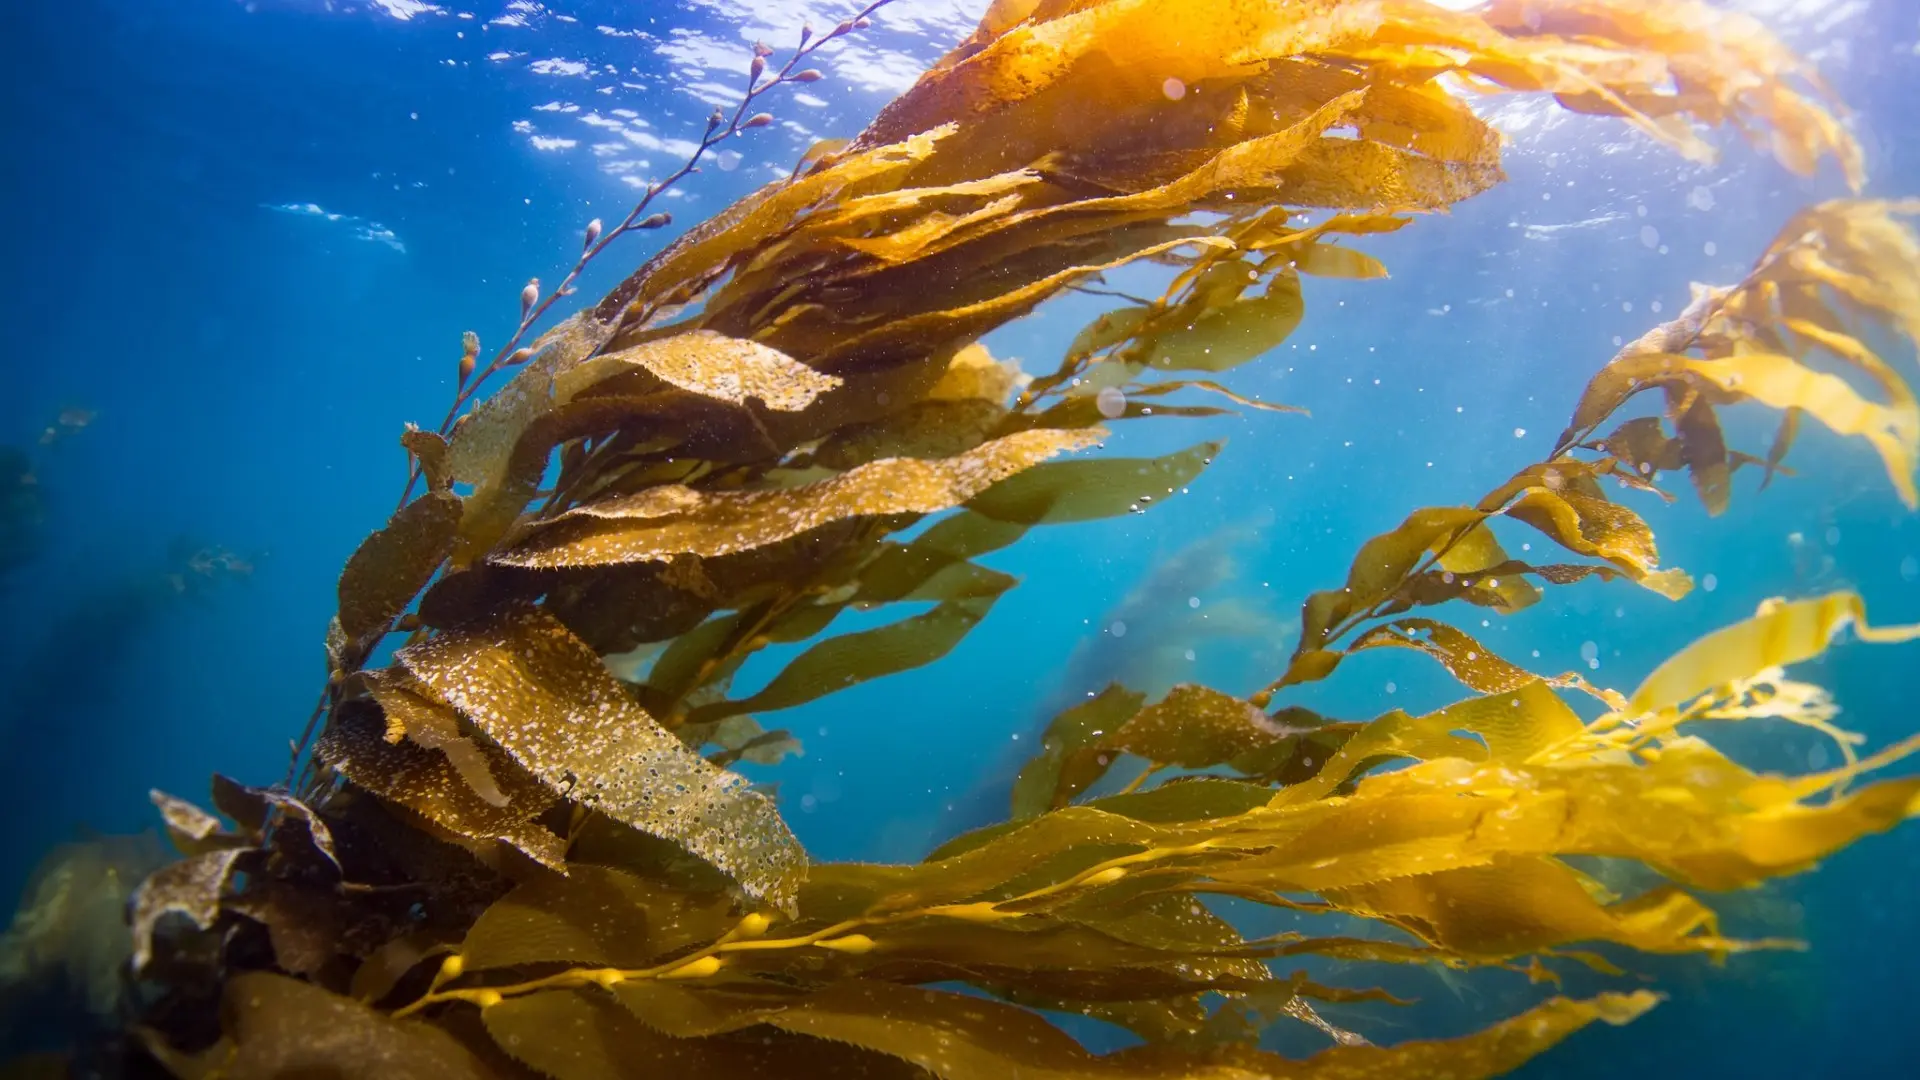 Scientists use gravel to help regrow kelp forests after “The Blob”